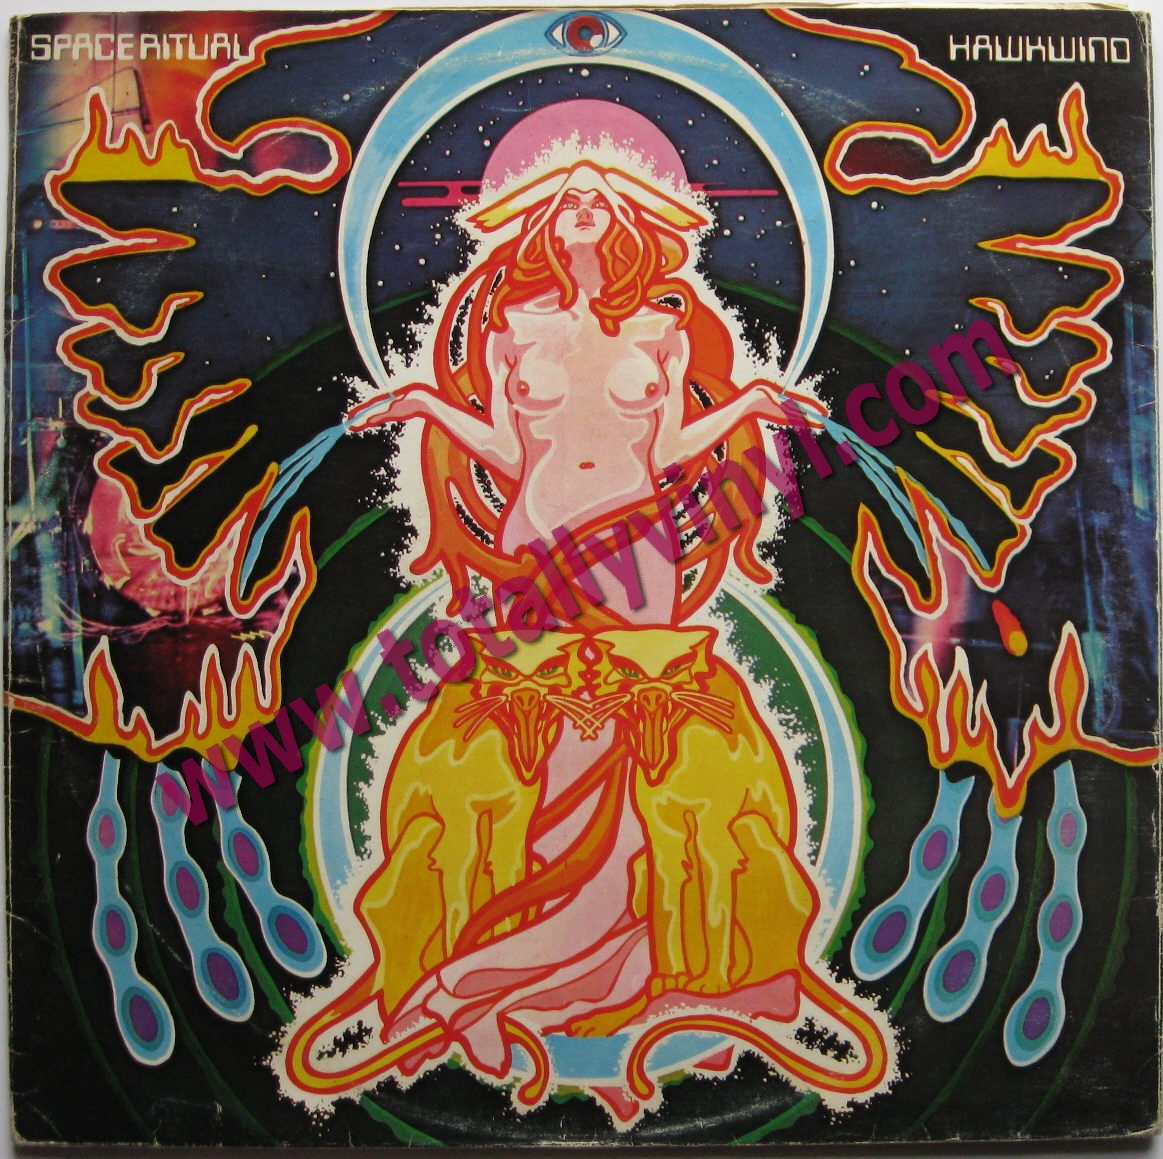 Totally Vinyl Records || Hawkwind - The space ritual Alive In